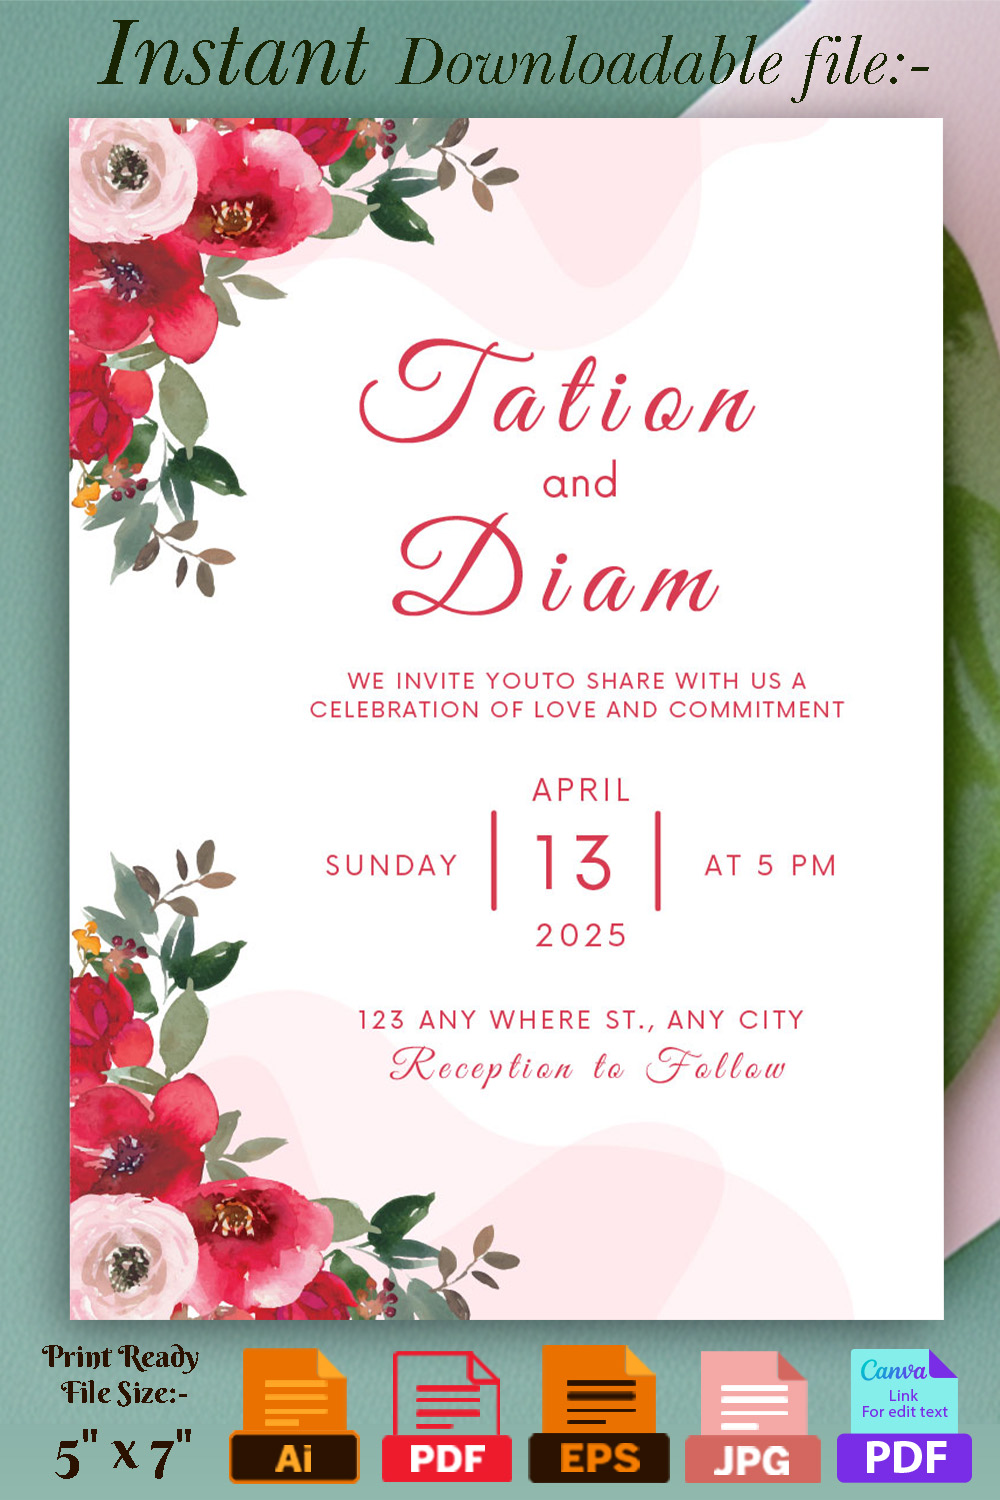 Image of charming wedding invitation with floral design.